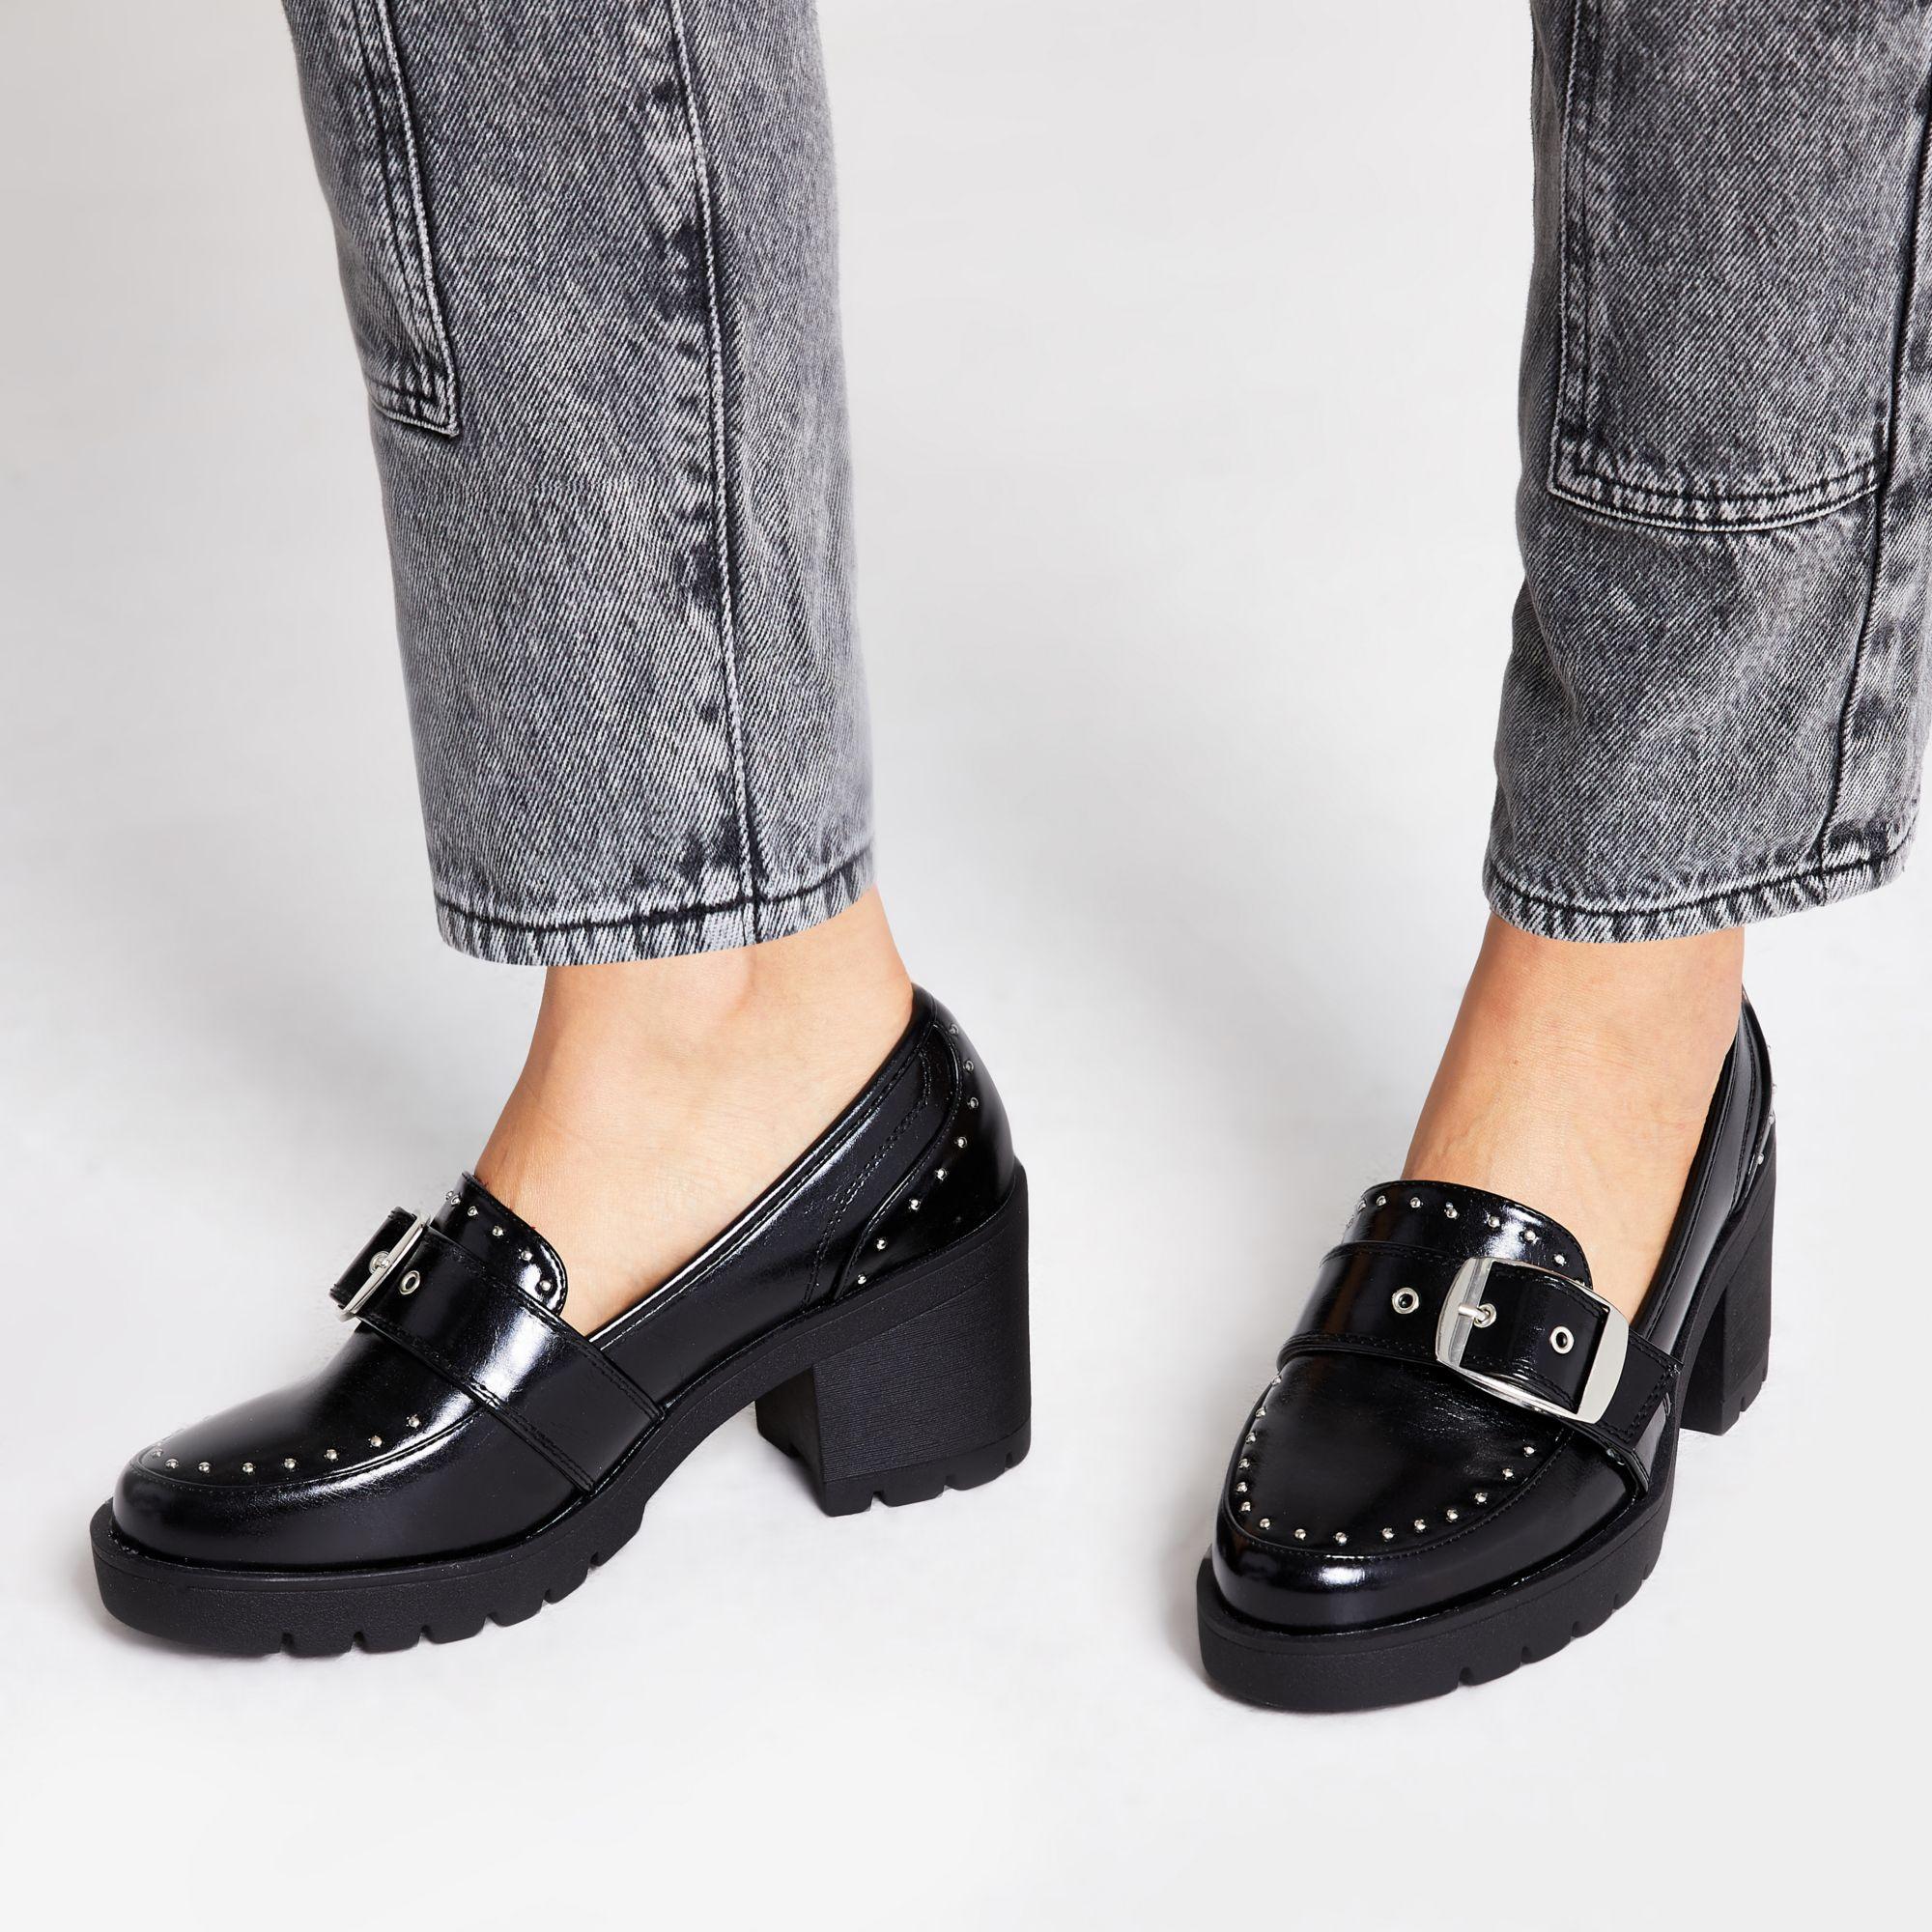 River Island Studded Chunky Heel Loafers in Black | Lyst